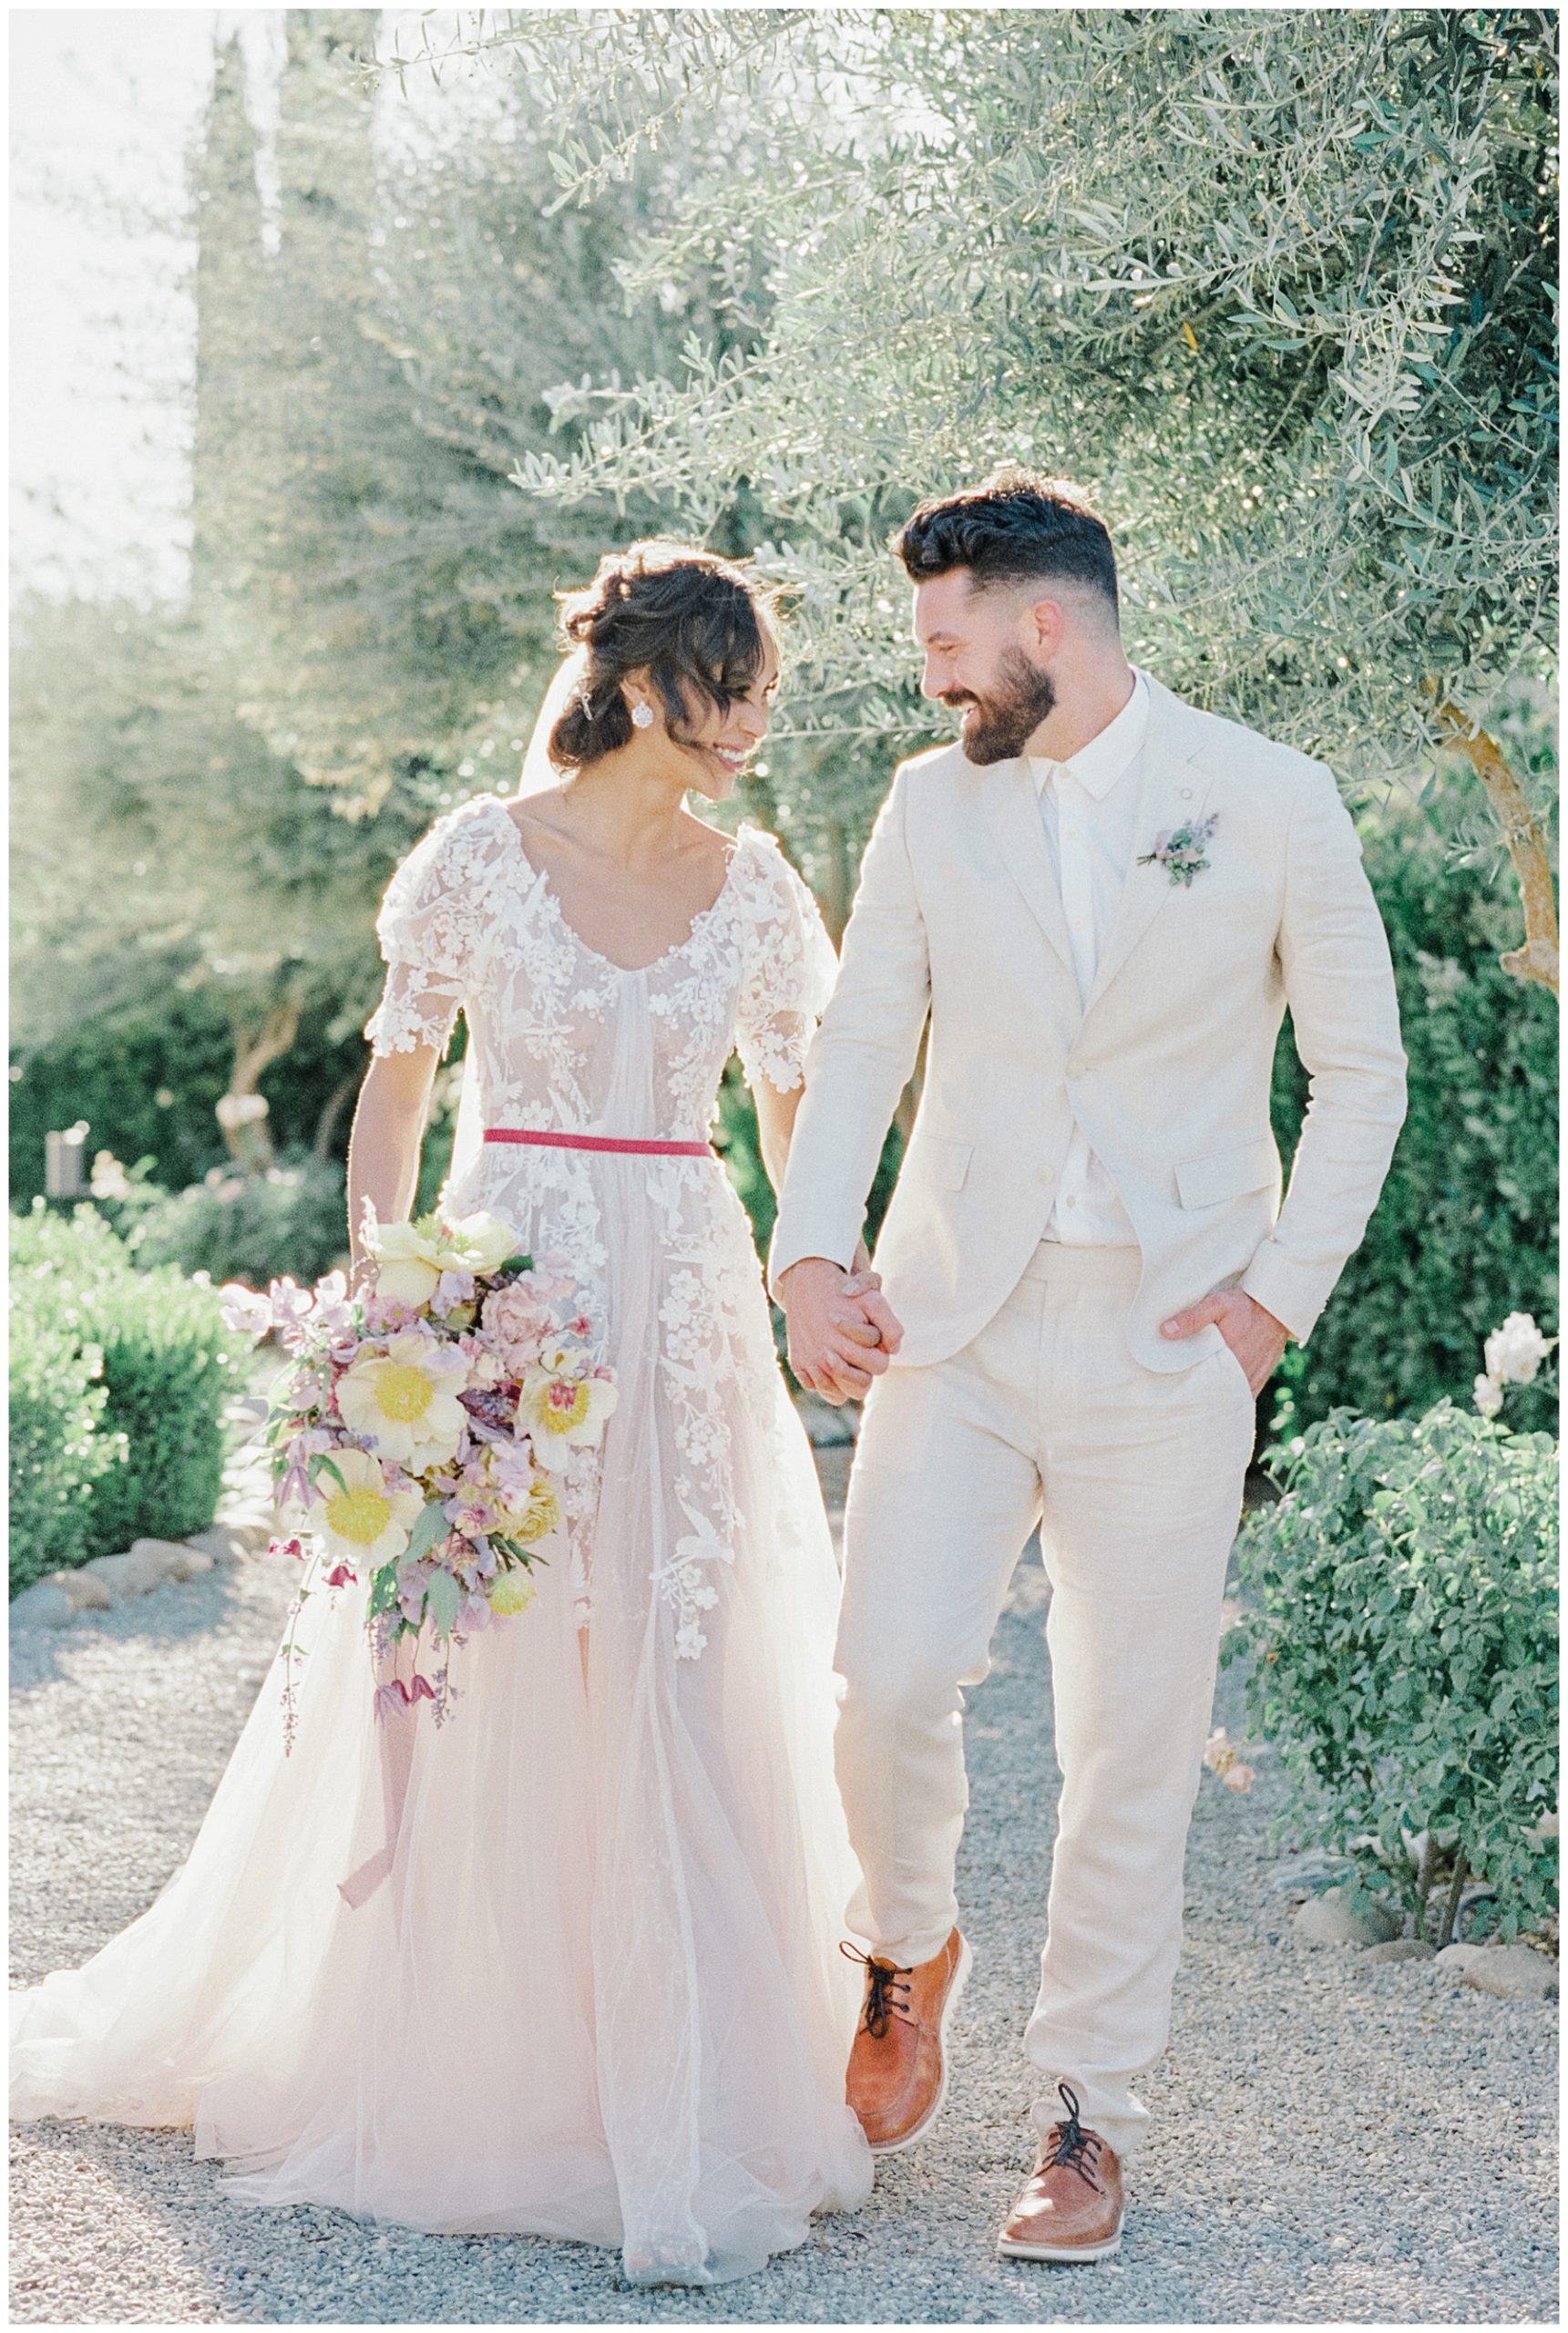 newlyweds walk hand in hand through vineyard in Paso Robles, CA